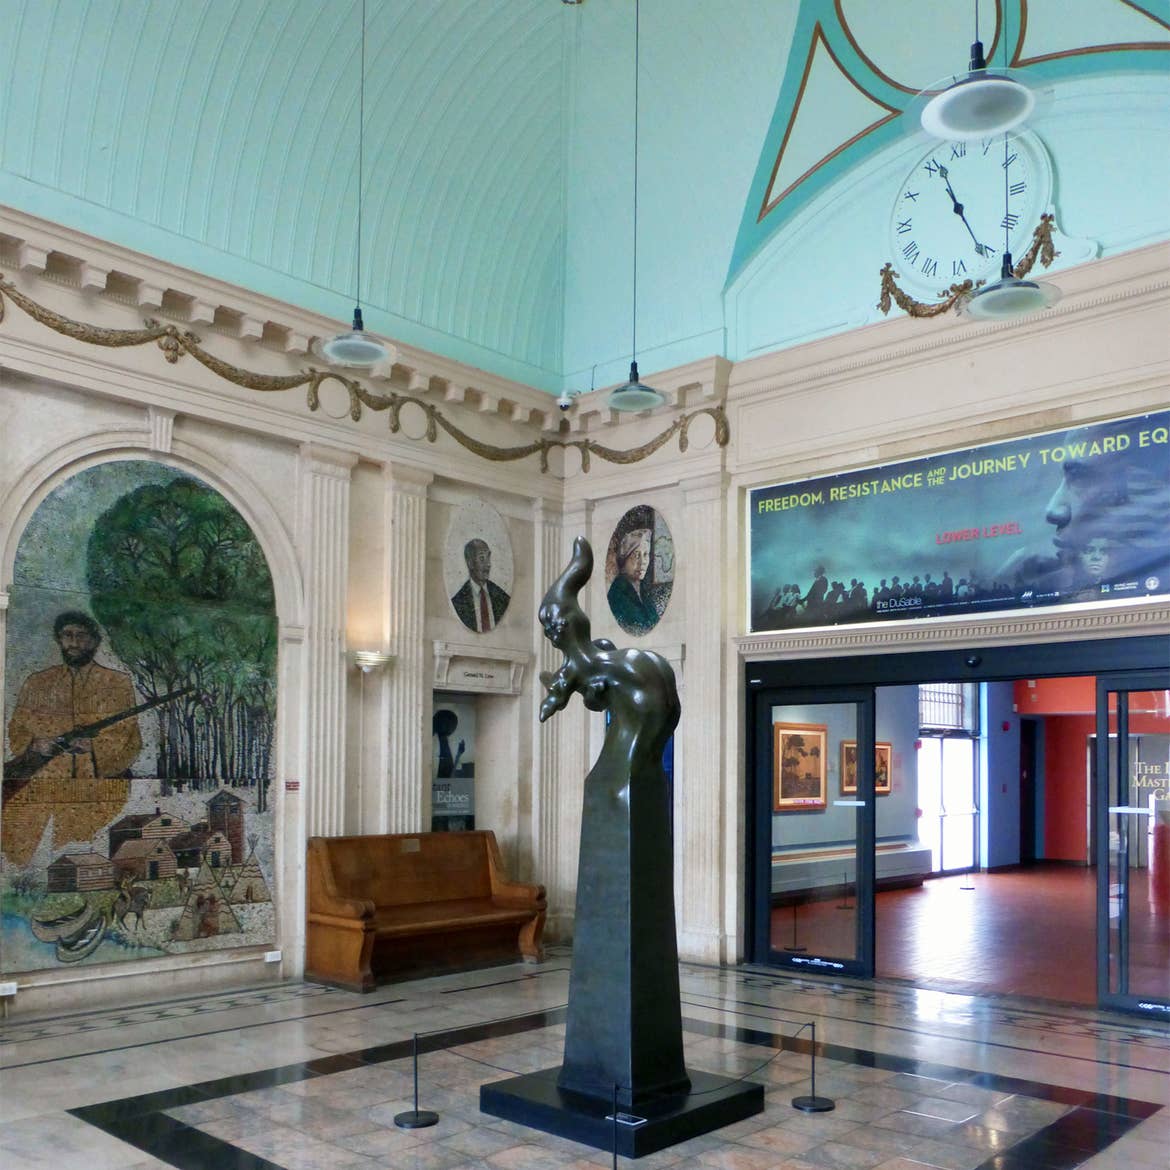 An interior space painted in robins egg blue and ornate decorative moldings have various murals and an abstract, black statue on display.